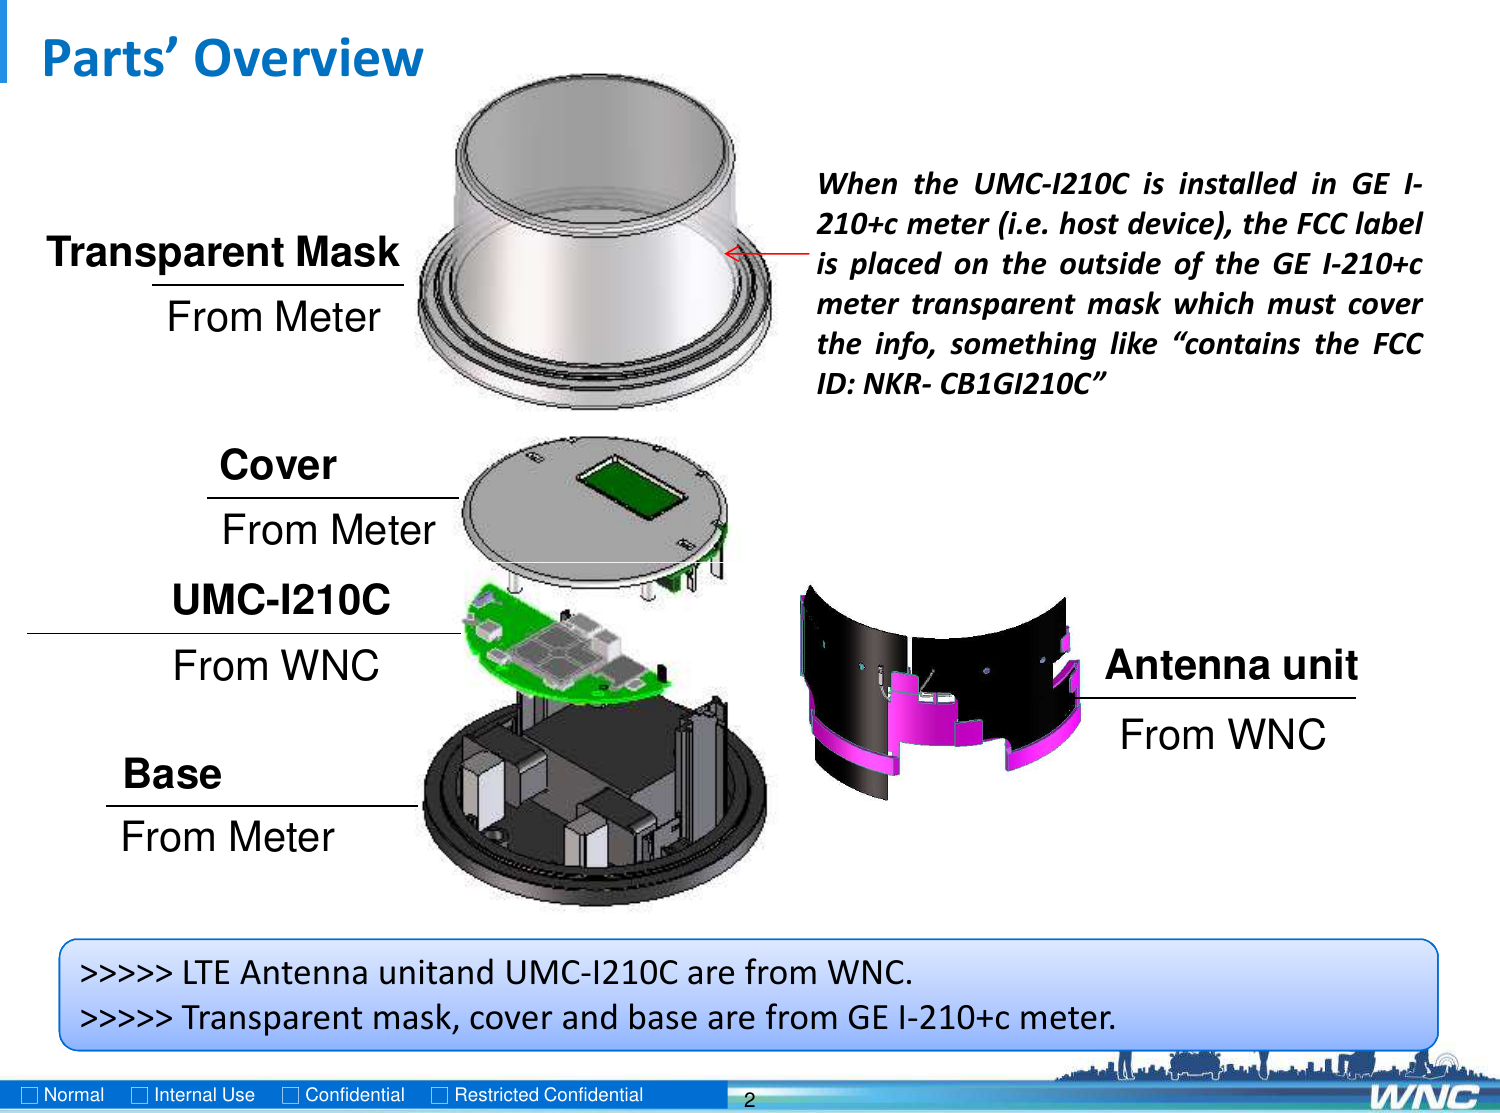 Parts’ OverviewCoverFrom MeterTransparent MaskFrom MeterWhen the UMC-I210C is installed in GE I-210+c meter (i.e. host device), the FCC labelis placed on the outside of the GE I-210+cmeter transparent mask which must coverthe info, something like “contains the FCCID: NKR- CB1GI210C”2□Normal     □Internal Use  □Confidential  □Restricted ConfidentialFrom MeterUMC-I210CBaseAntenna unitFrom WNCFrom WNC&gt;&gt;&gt;&gt;&gt; LTE Antenna unitand UMC-I210C are from WNC.&gt;&gt;&gt;&gt;&gt; Transparent mask, cover and base are from GE I-210+c meter.